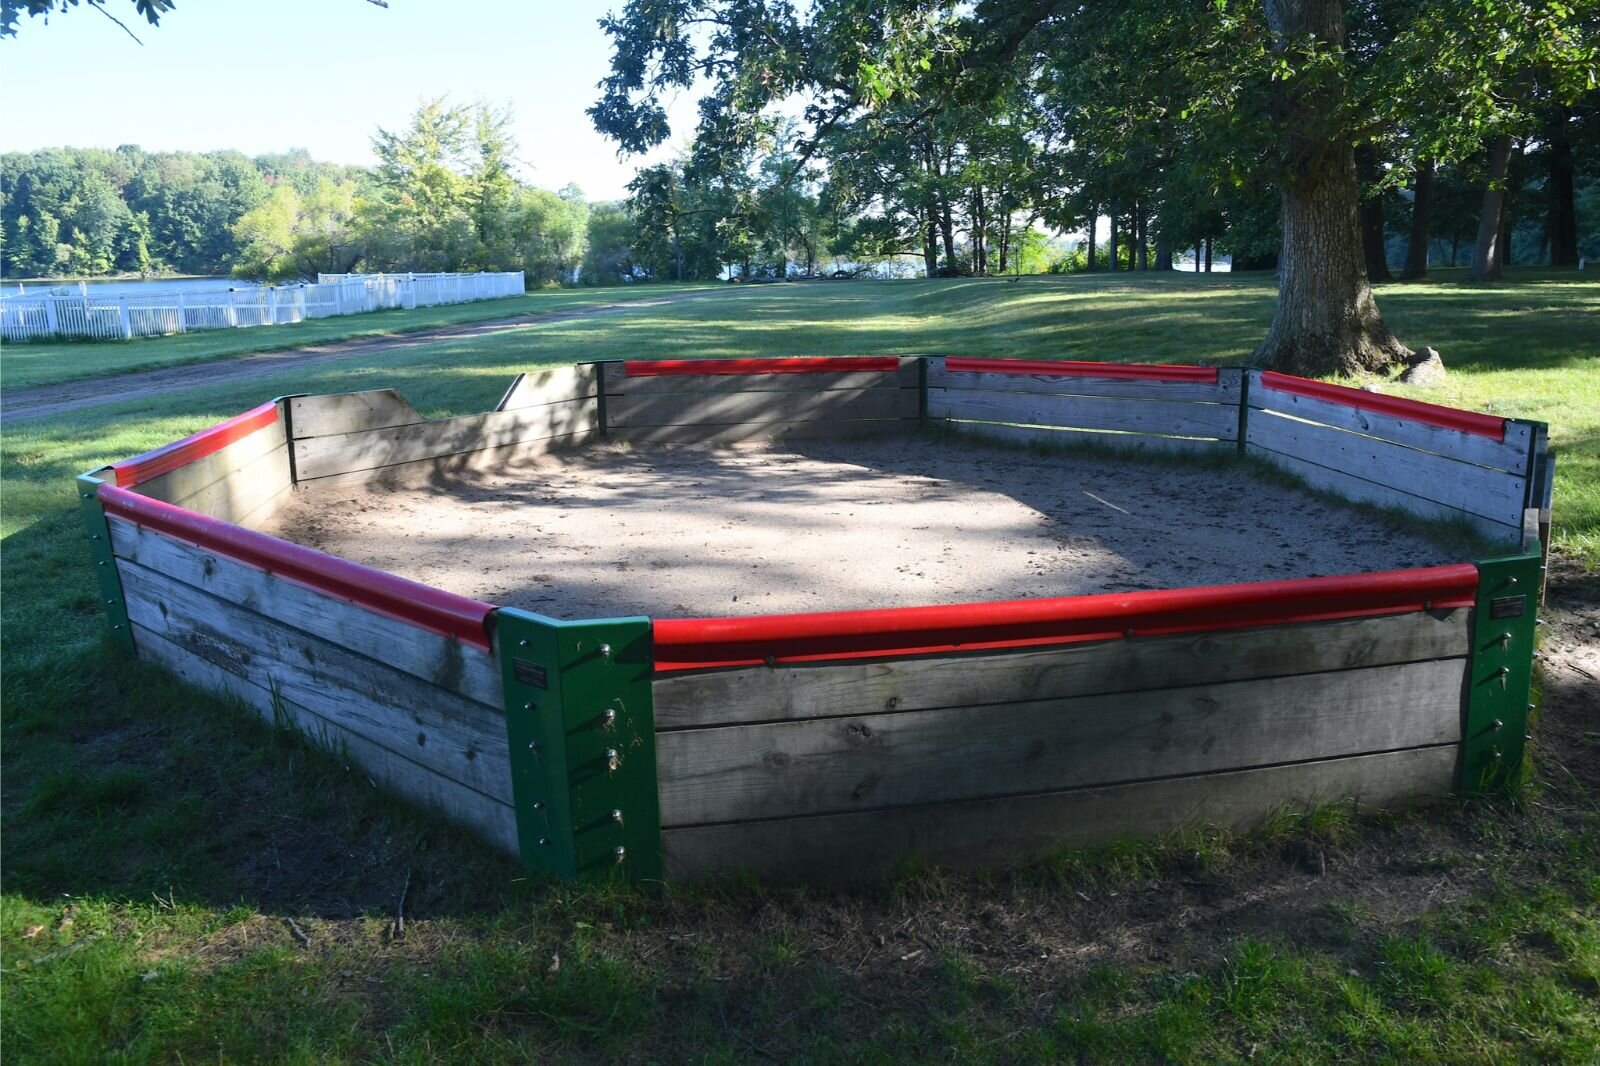 A Gaga Ball pit, for playing, at the Battle Creek Outdoor Education Center